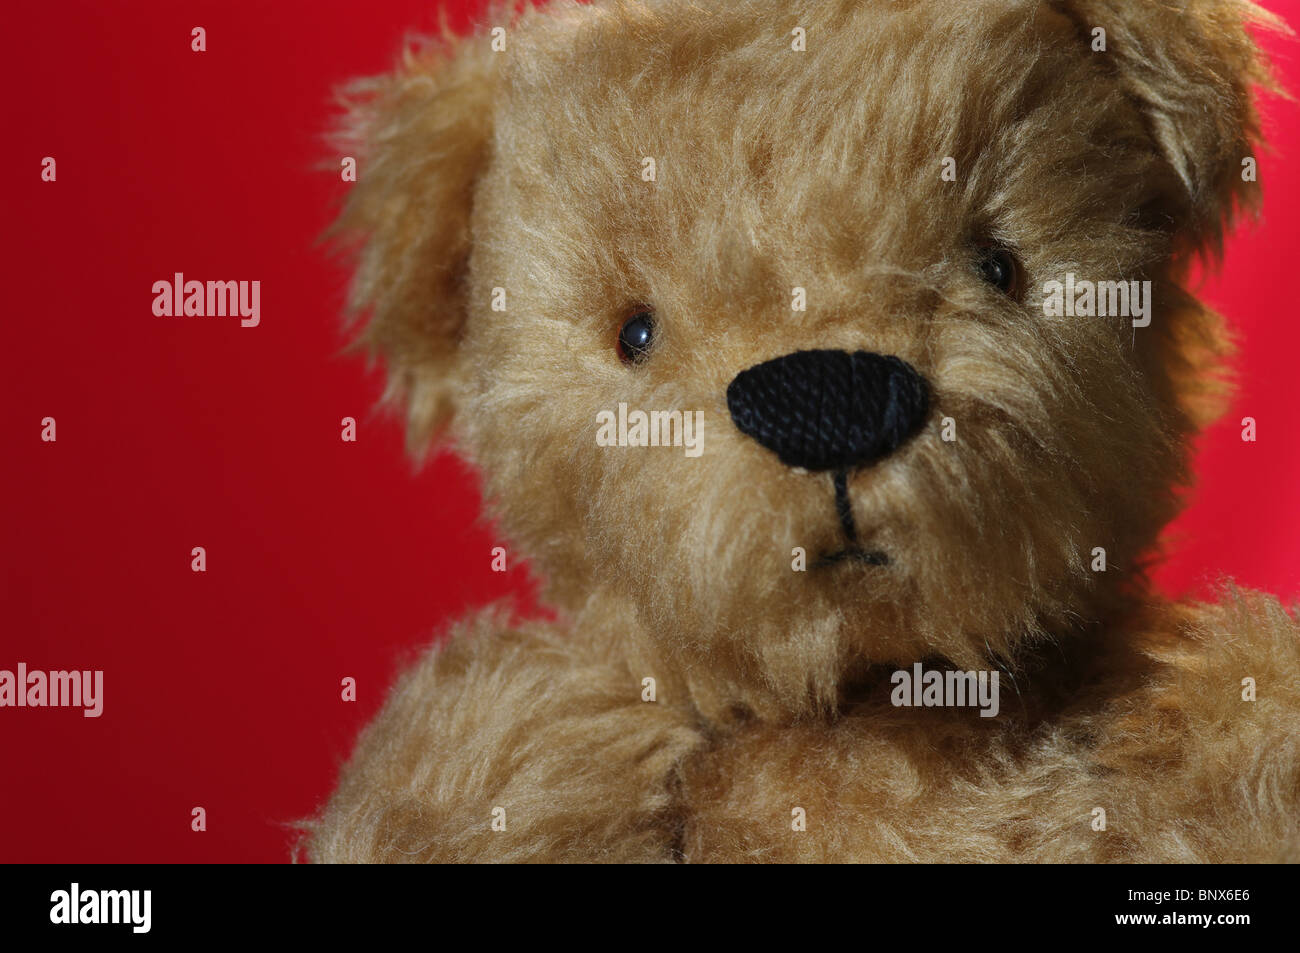 Antique teddy bear against a red background Stock Photo